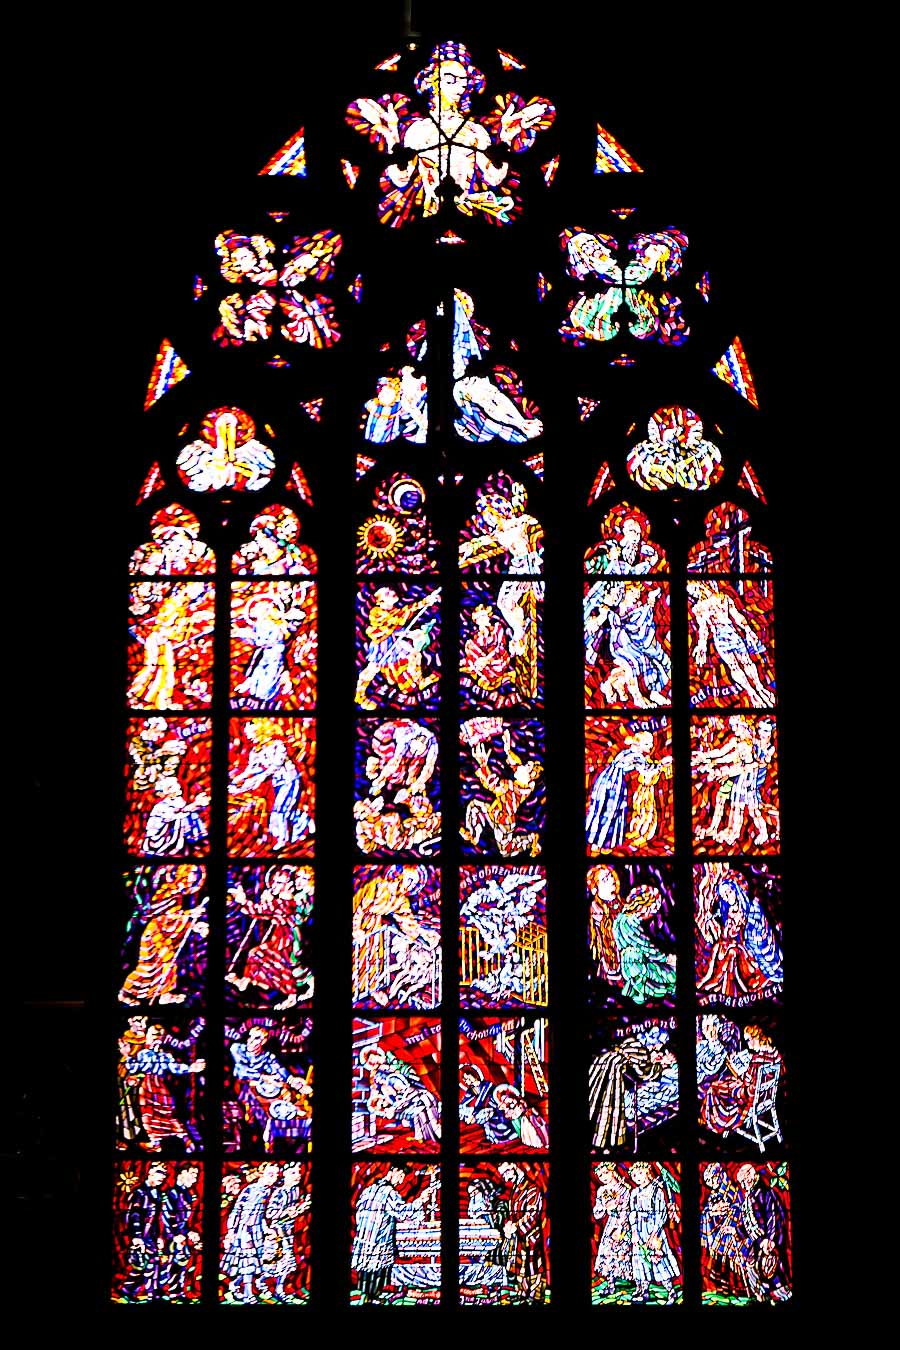 St. Vitus Cathedral Stained Glass Windows